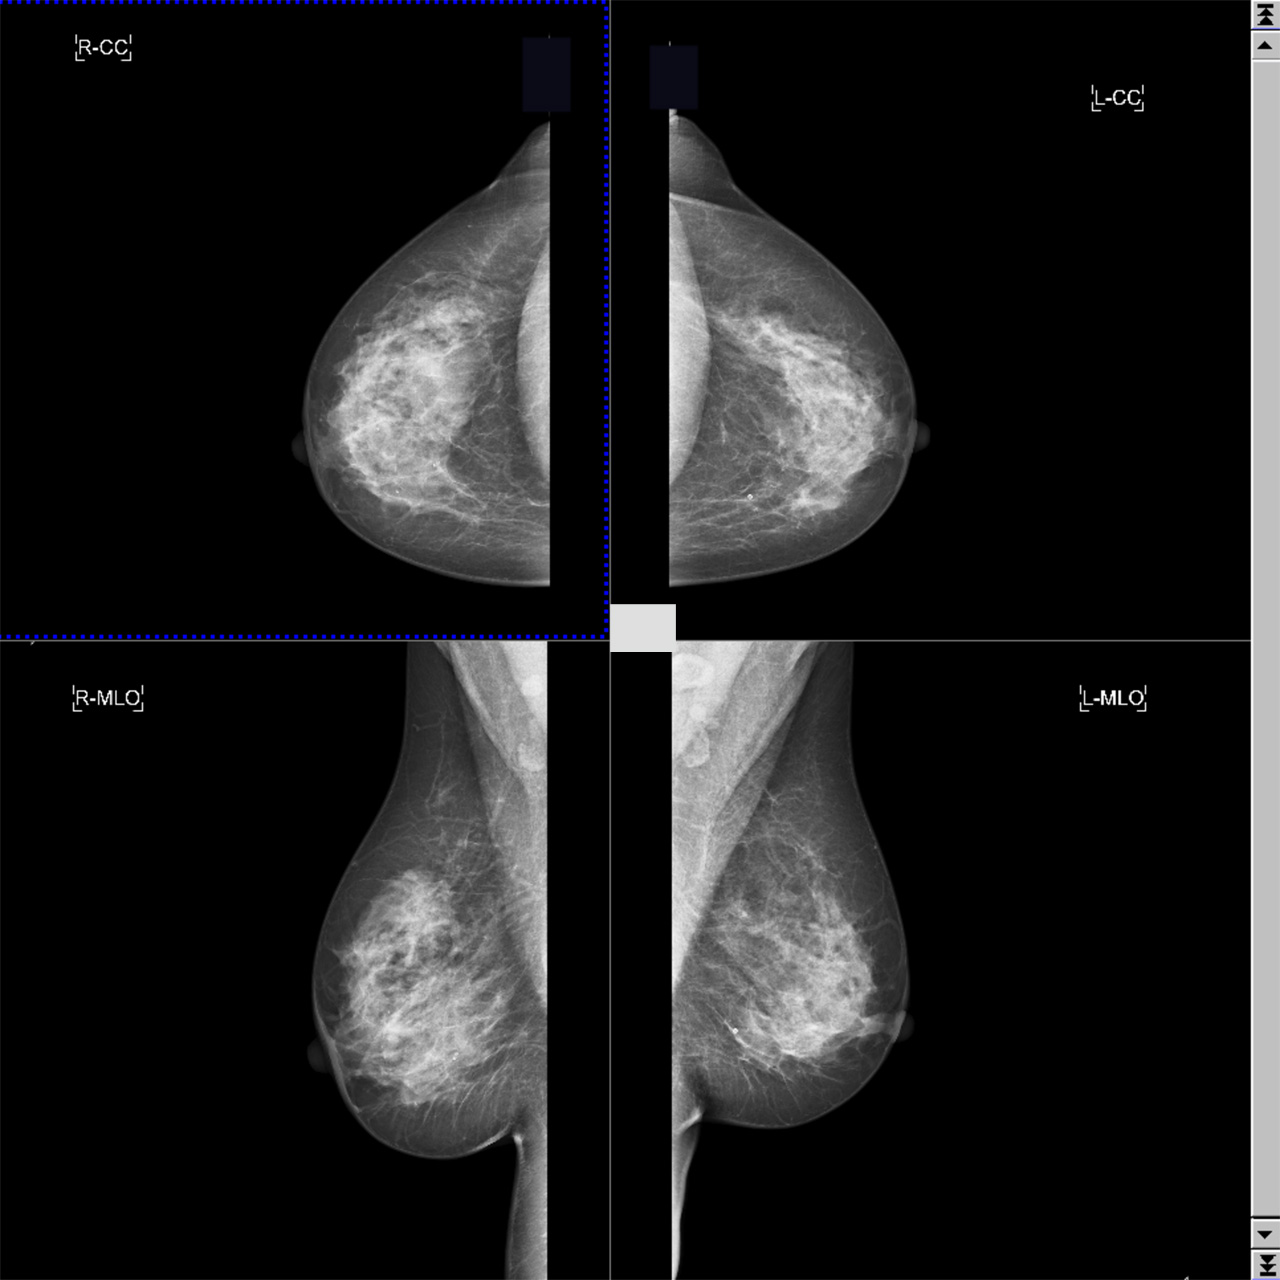 digital-mammography-system-mammomat-inspiration-instant-image-preview.jpg